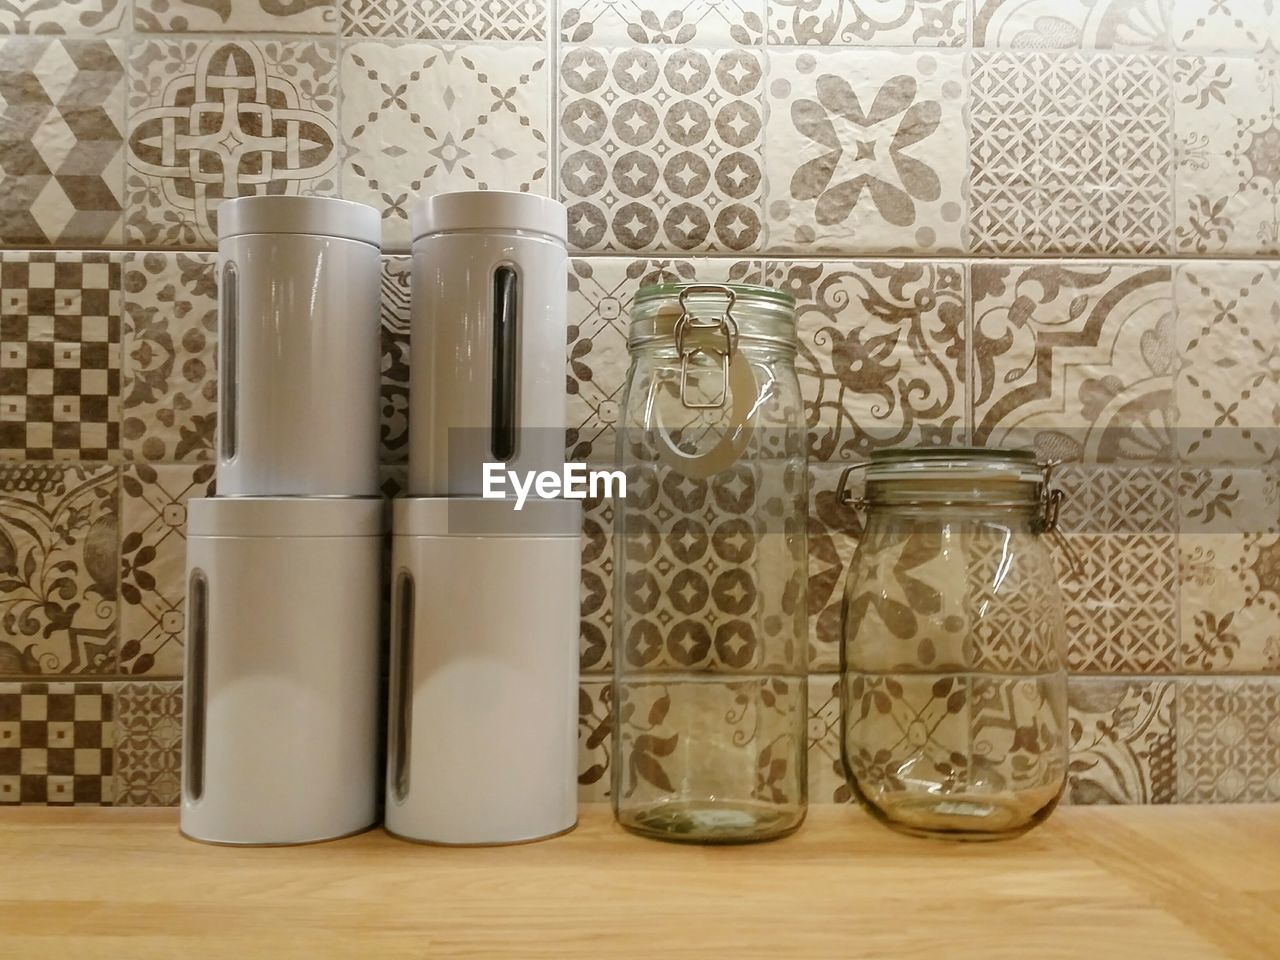 Glass jars and containers on table against wall